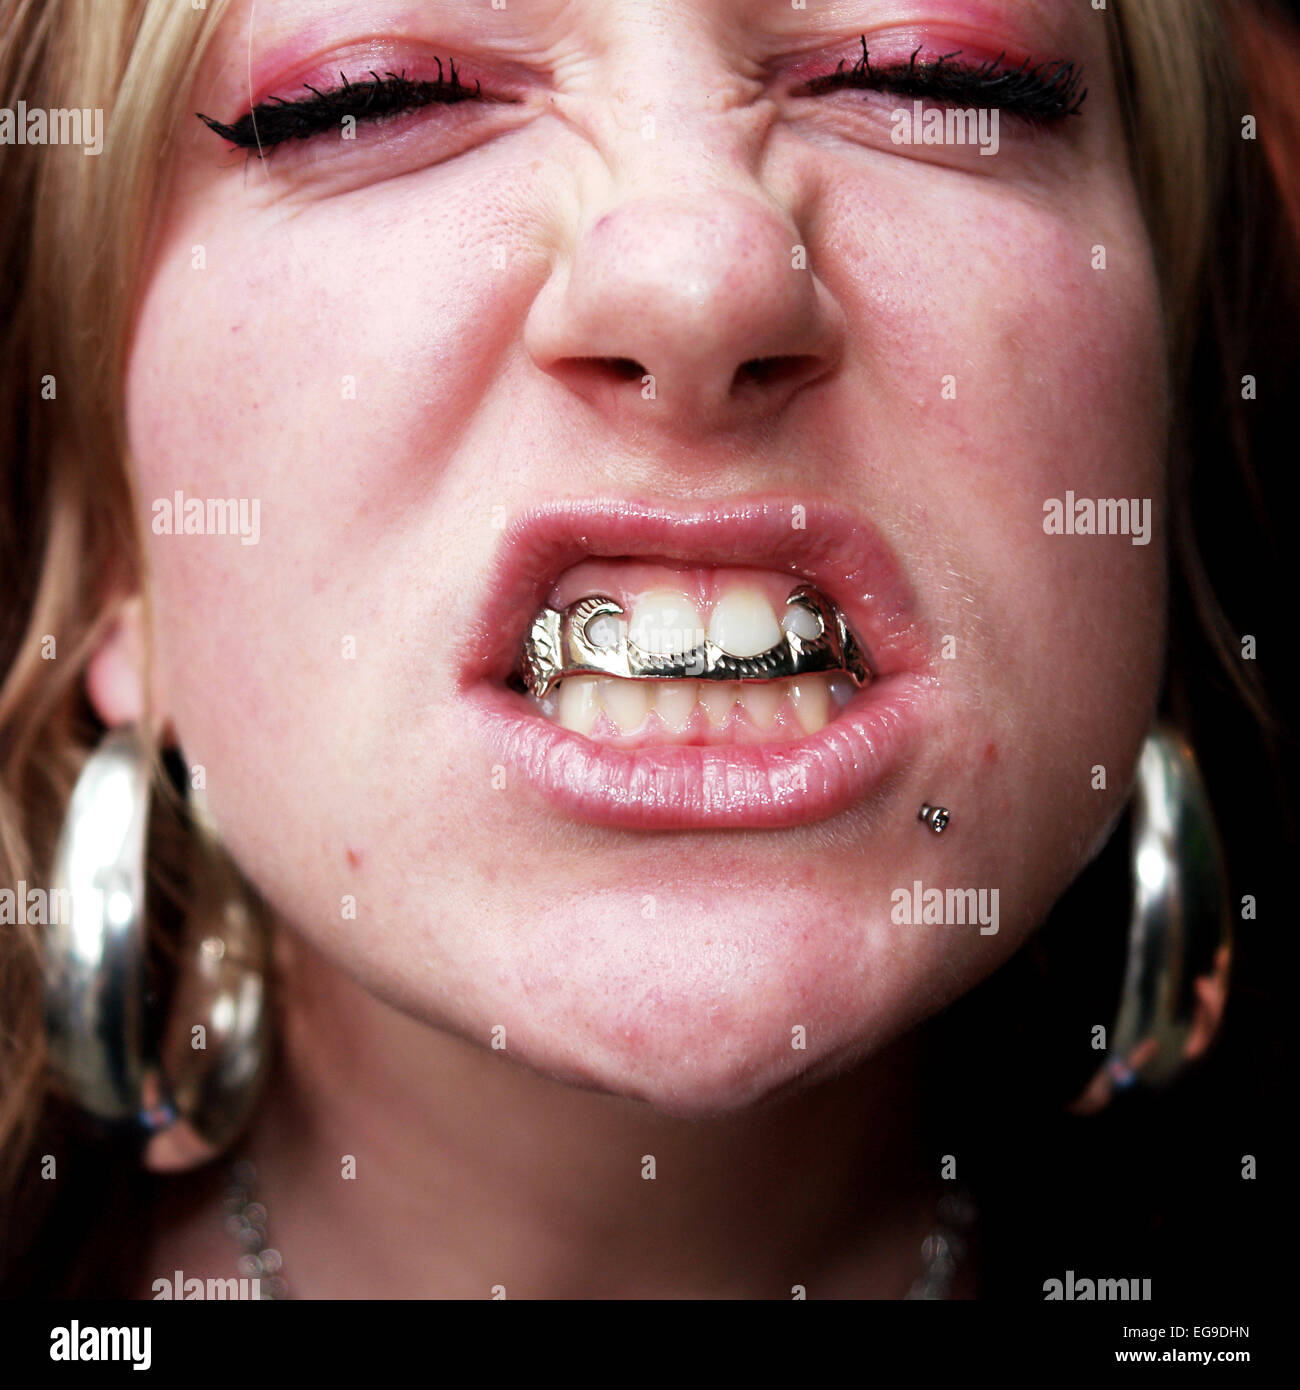 Portrait of a Woman wearing a dental grill Stock Photo